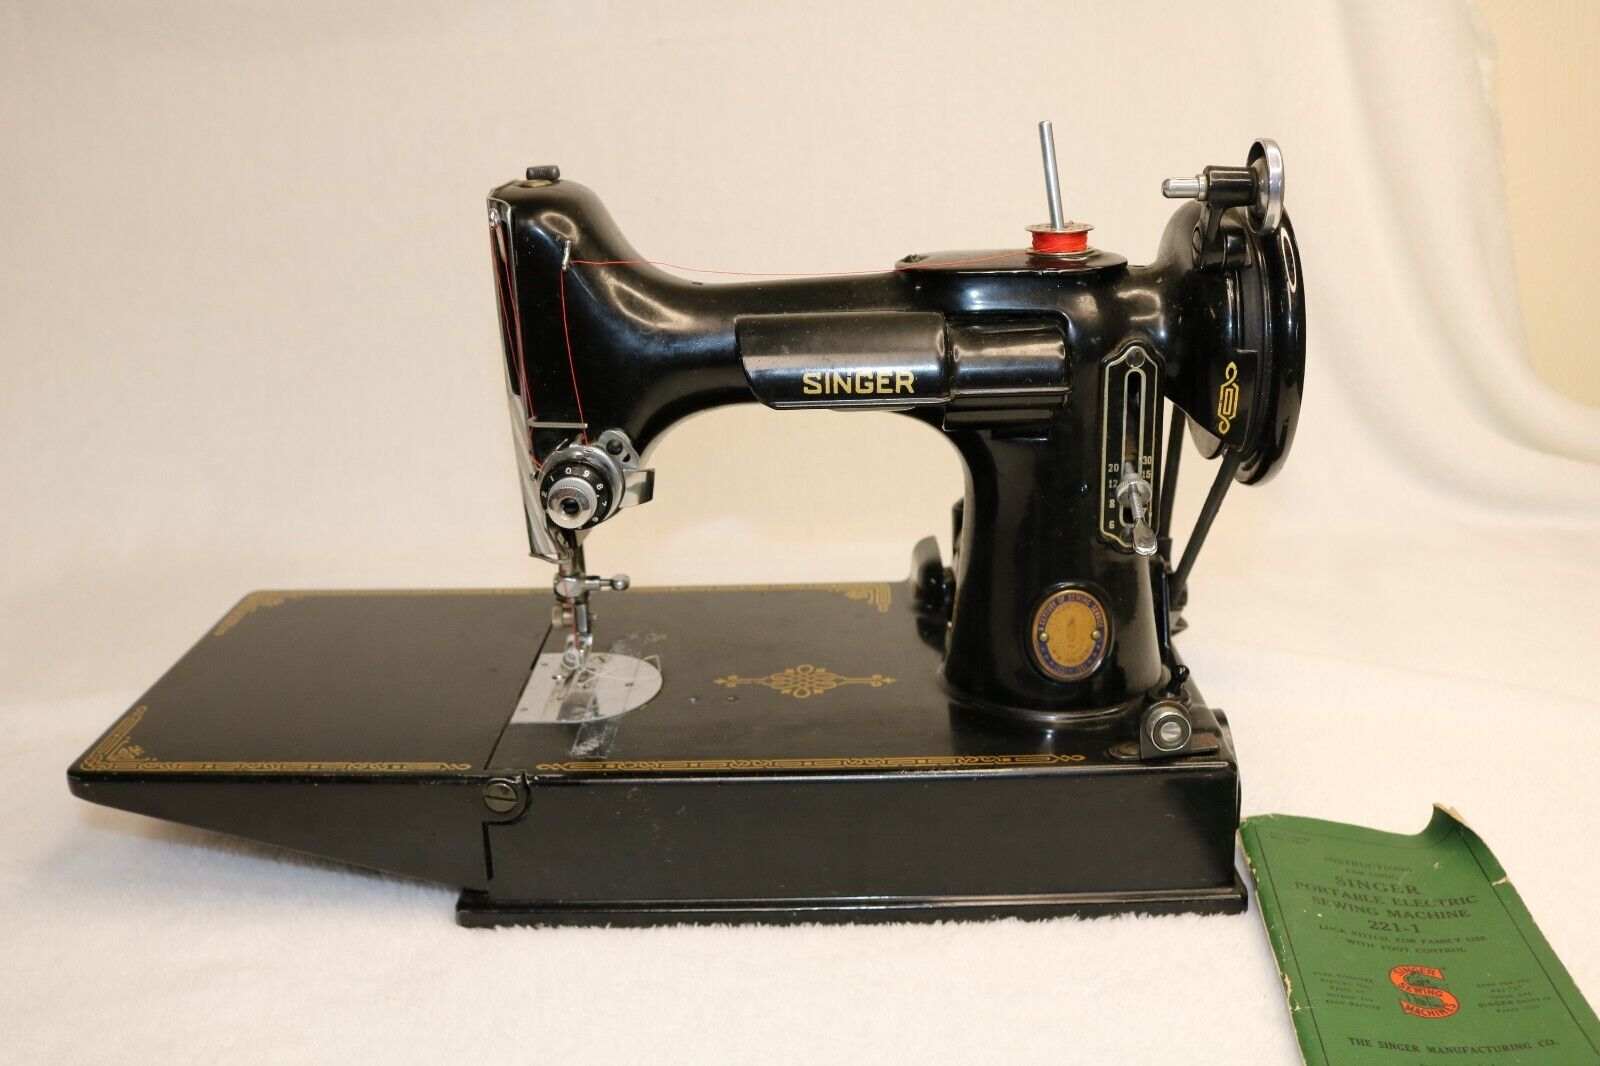 VINTAGE Singer Featherweight 221-1 Sewing Machine Untested